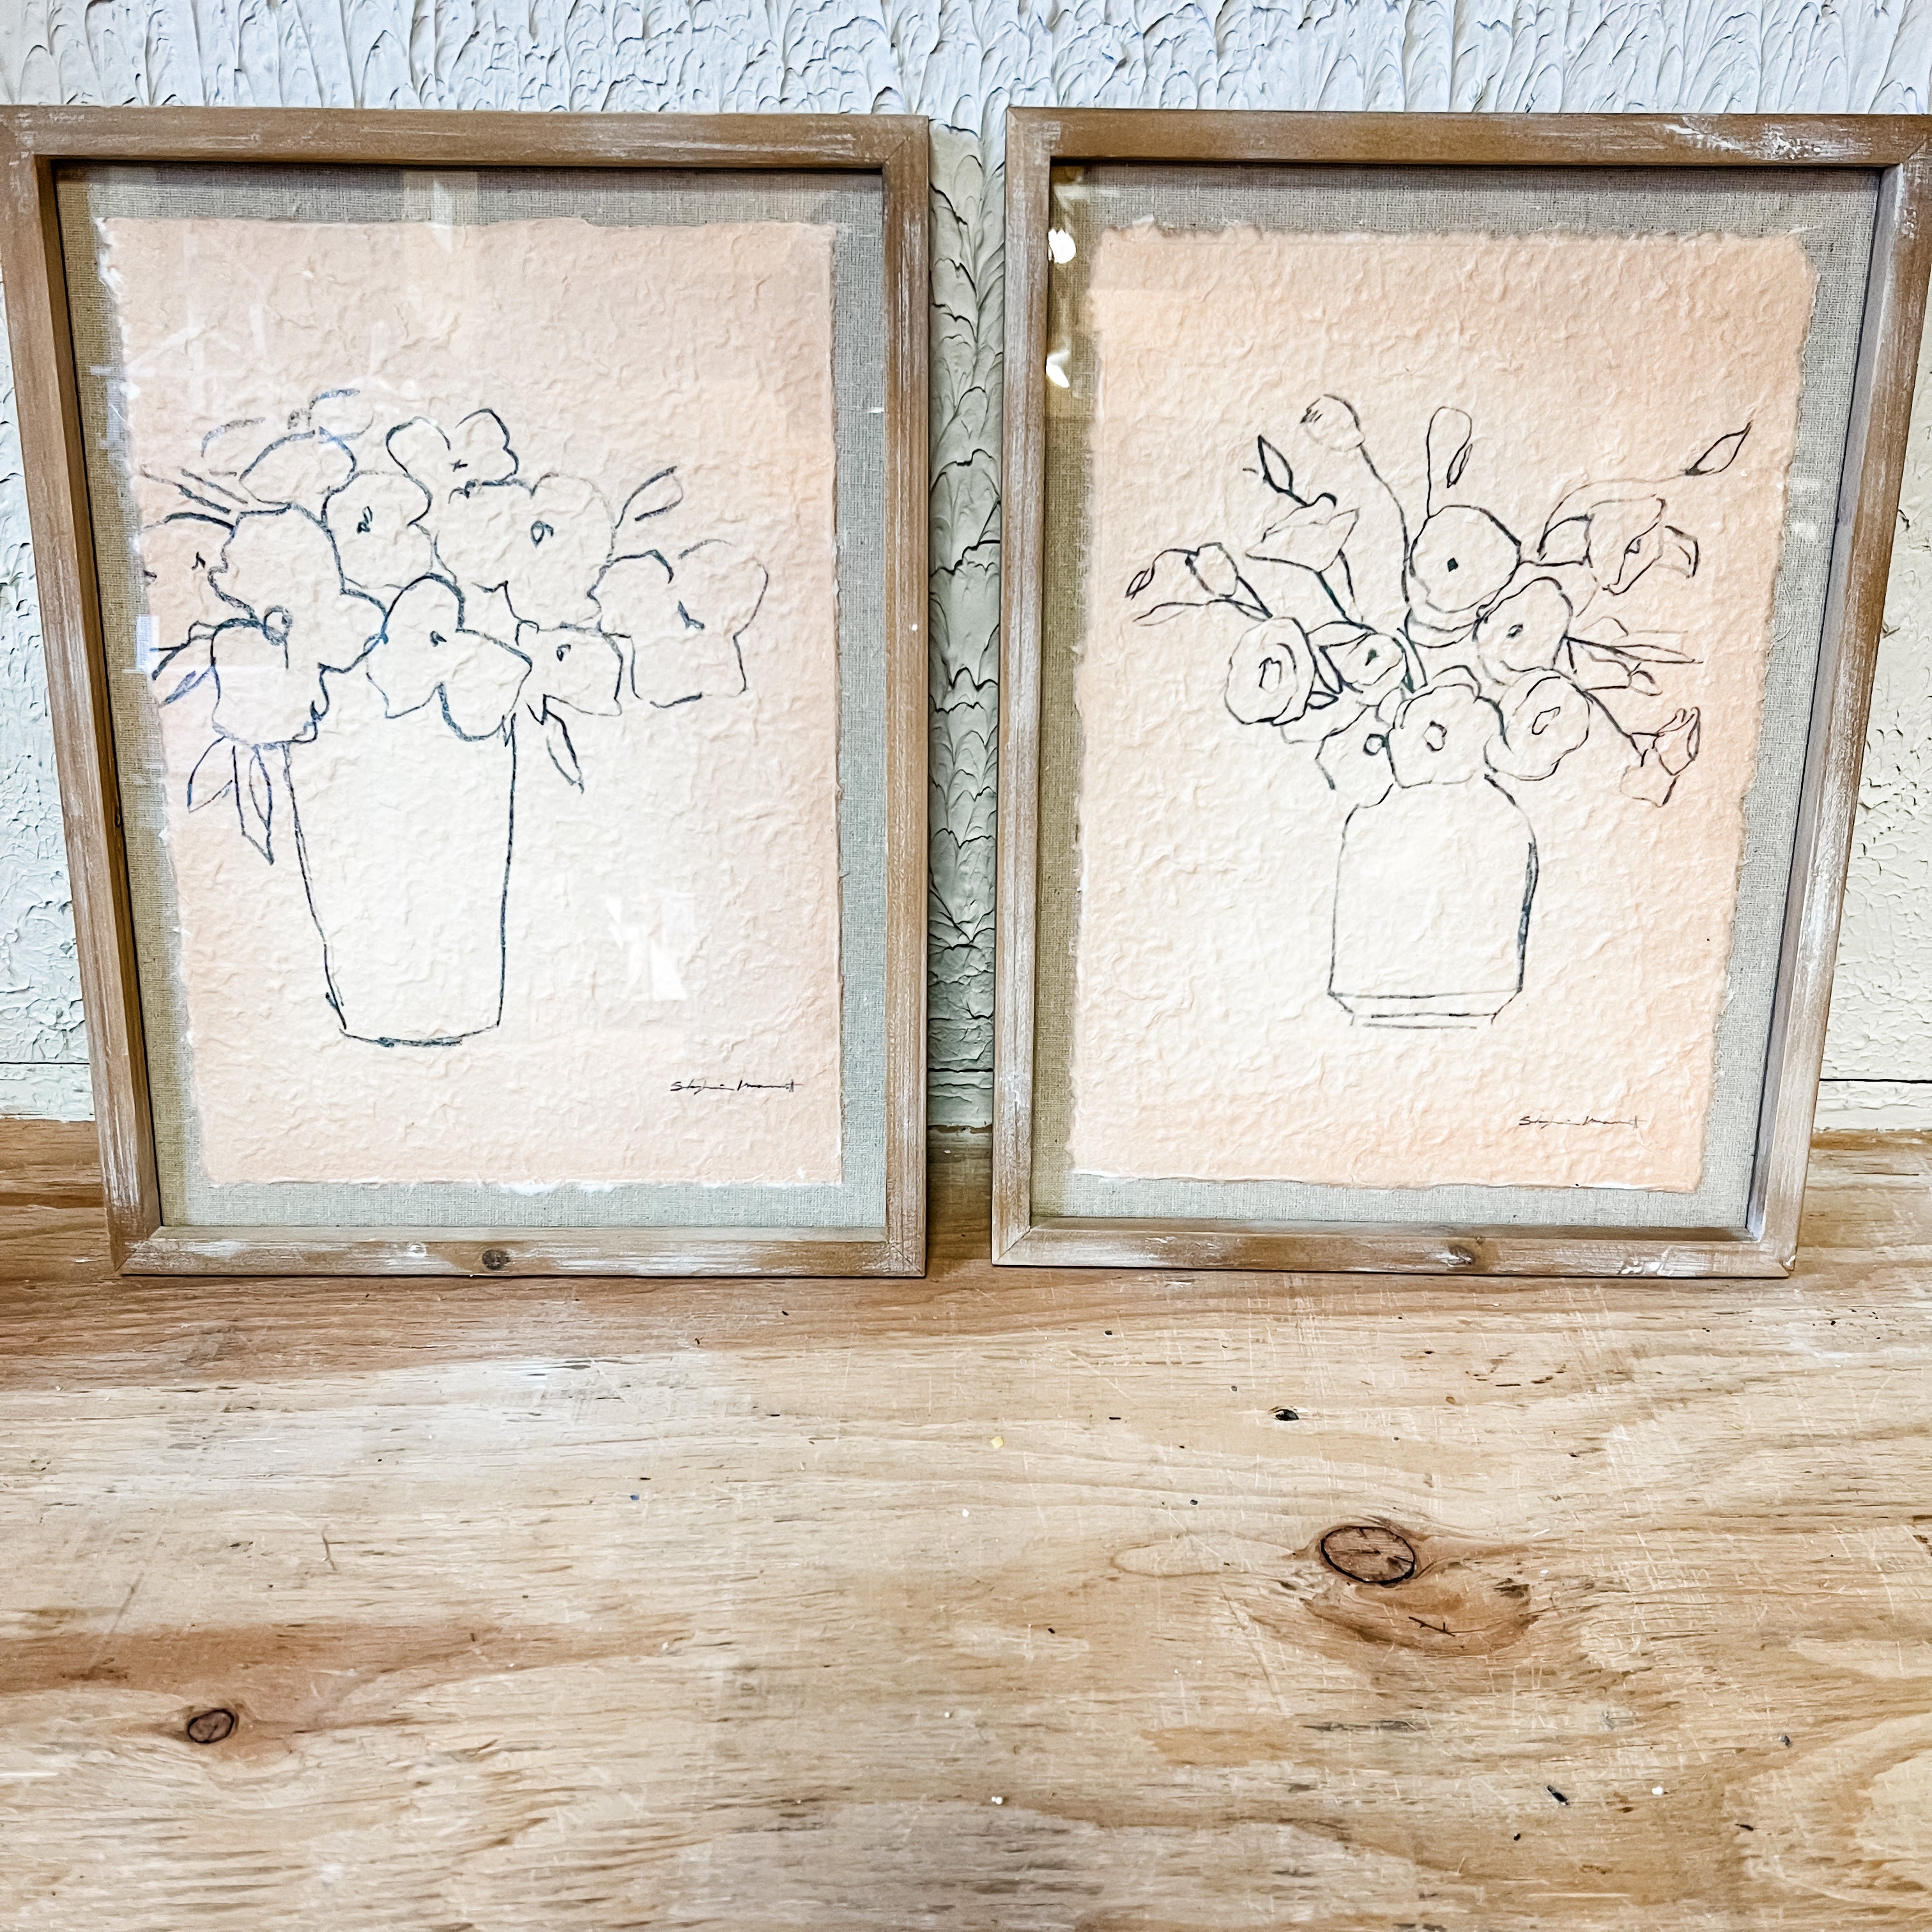 Sketched vase art work in distressed paper and framed the rustic barn ct